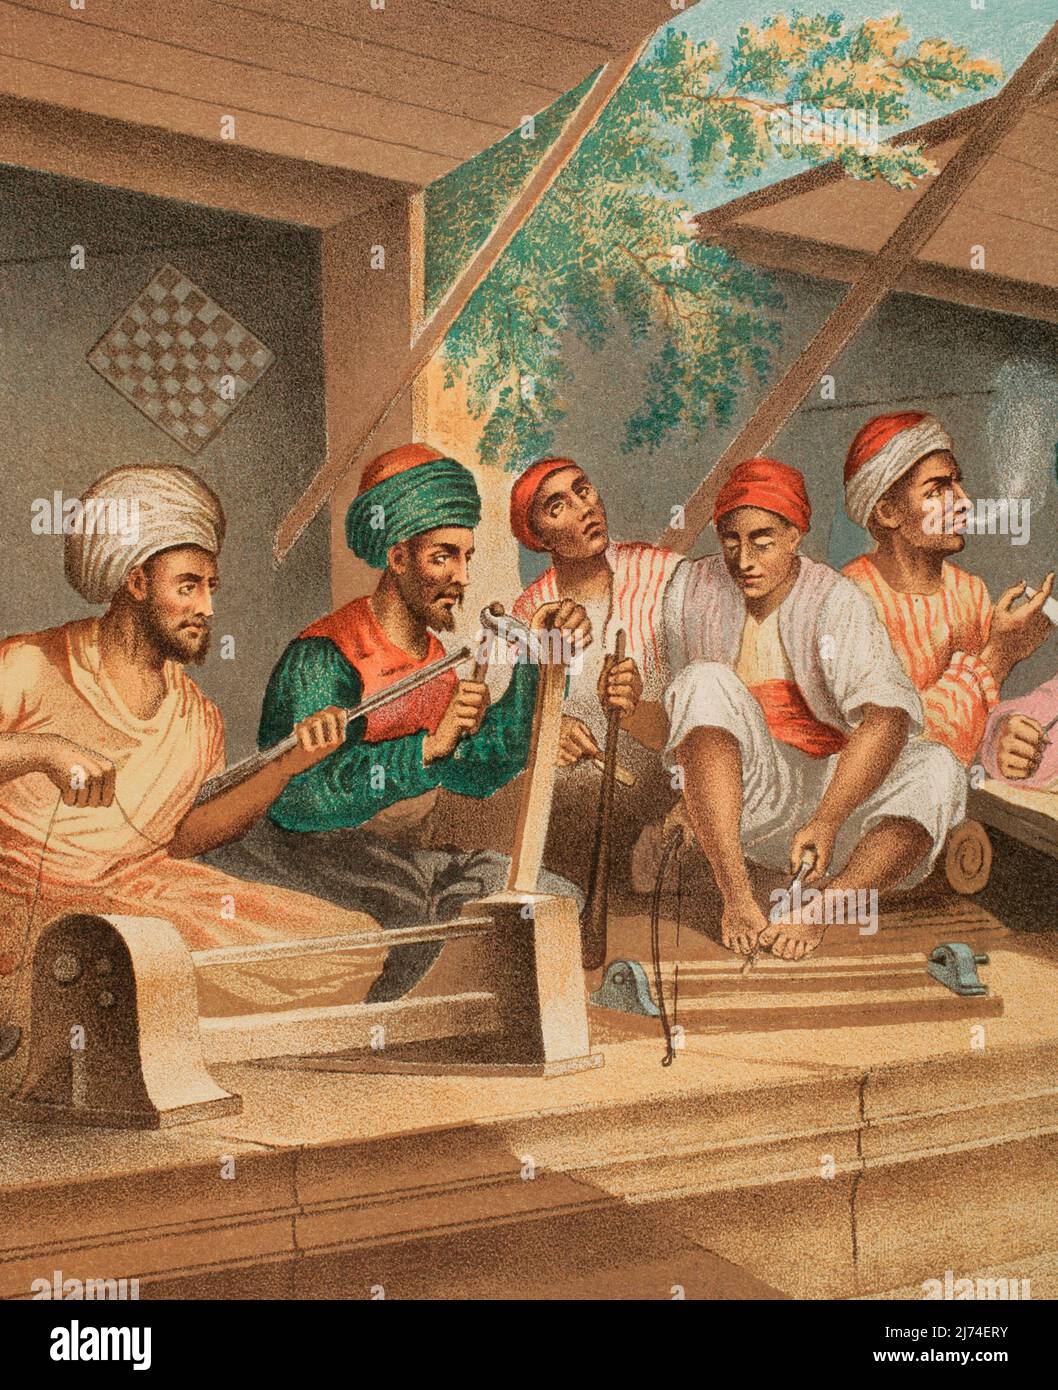 Turkish craftsmen in Constantinople. From left to right: passementerie maker, pipe maker and wood turners. Chromolithography. Illustration by José Acevedo. Lithograph by José Maria Mateu. Detail. "Viaje a Oriente", 1878. Author: José Acevedo. Spanish artist of the mid-19th century. Stock Photo